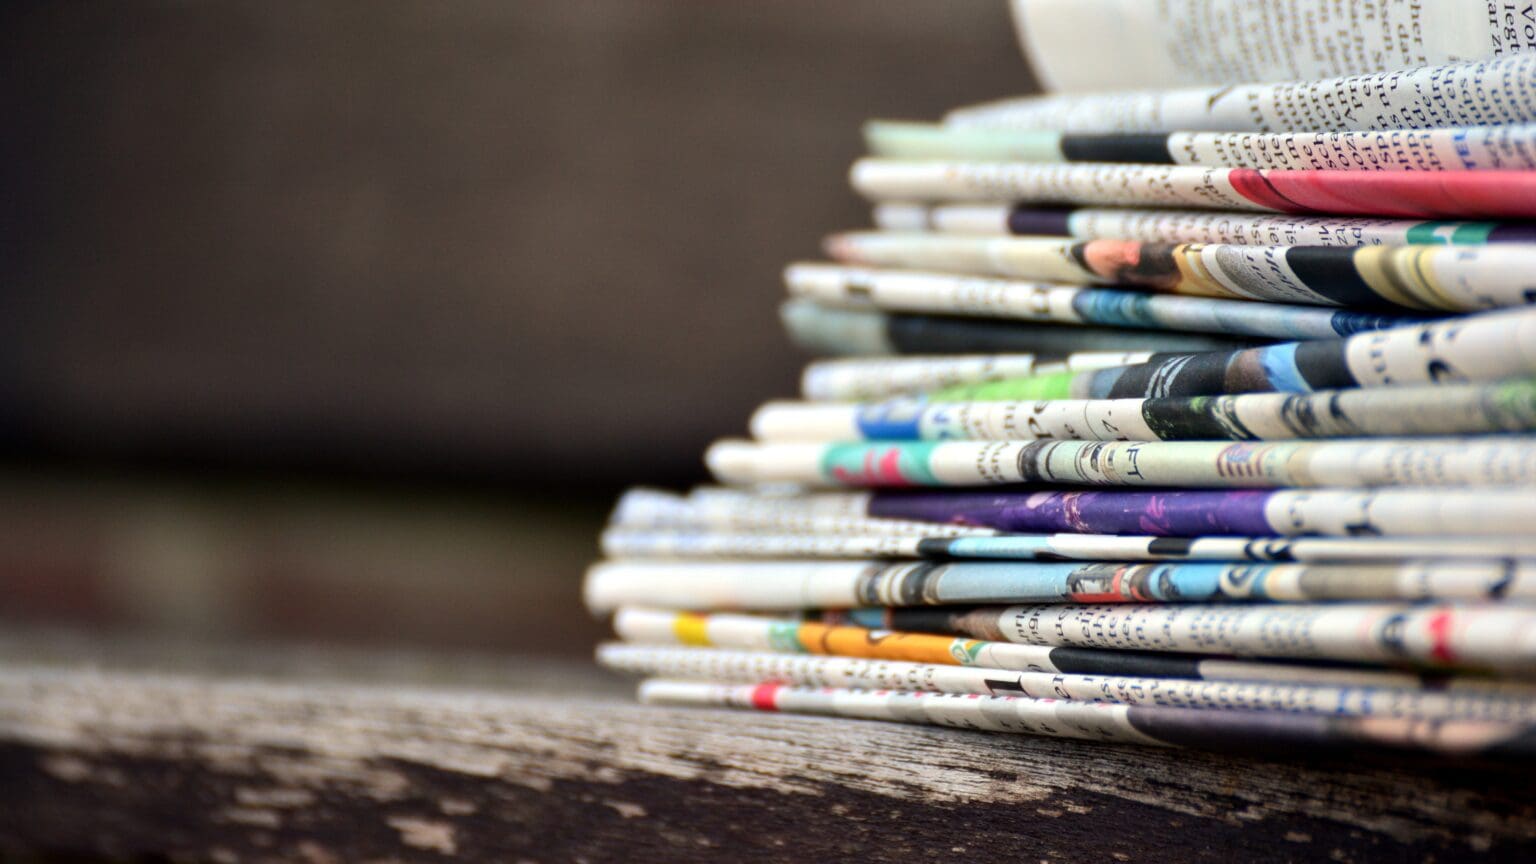 Print Media’s Decline: Study Reveals Shifting Trends in Information Consumption in Hungary